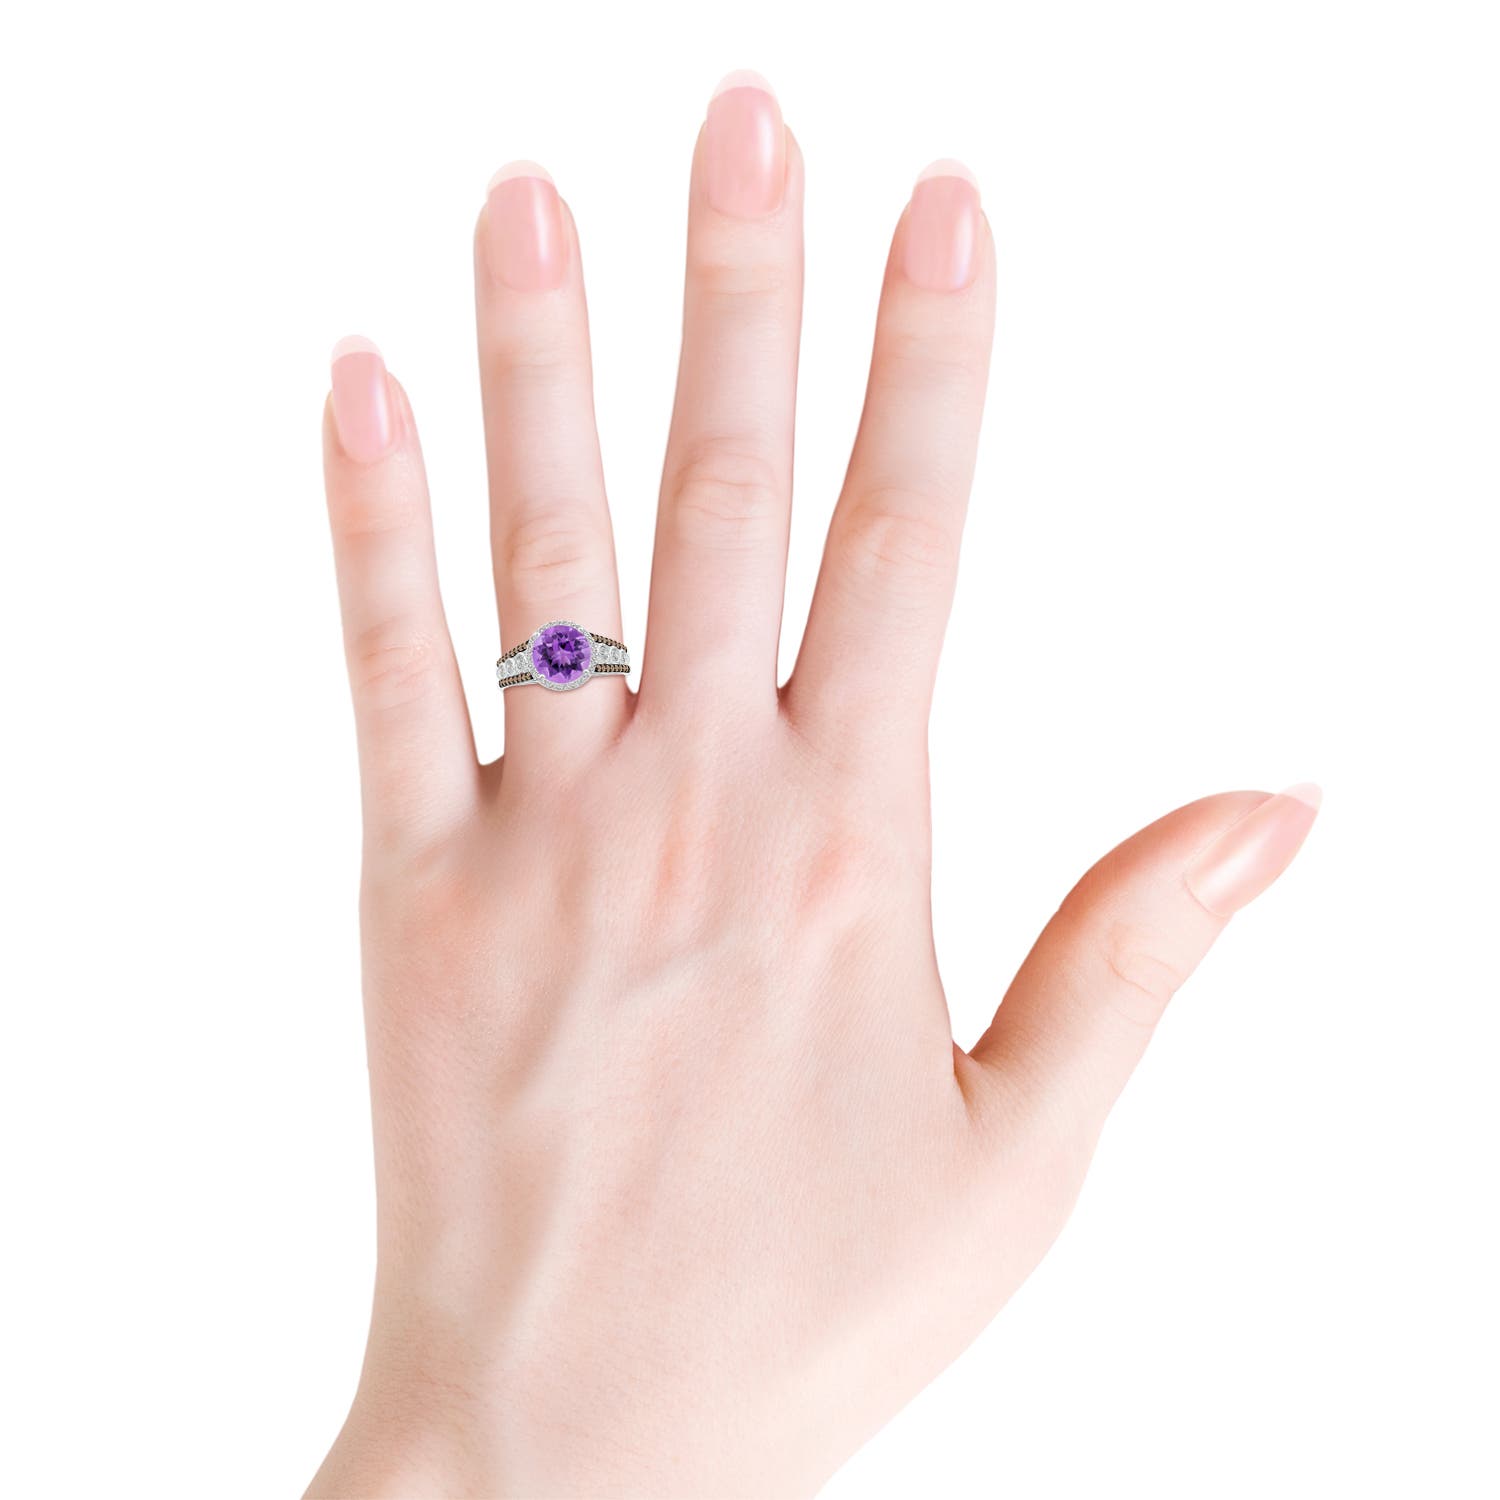 AA - Amethyst / 2.11 CT / 14 KT White Gold